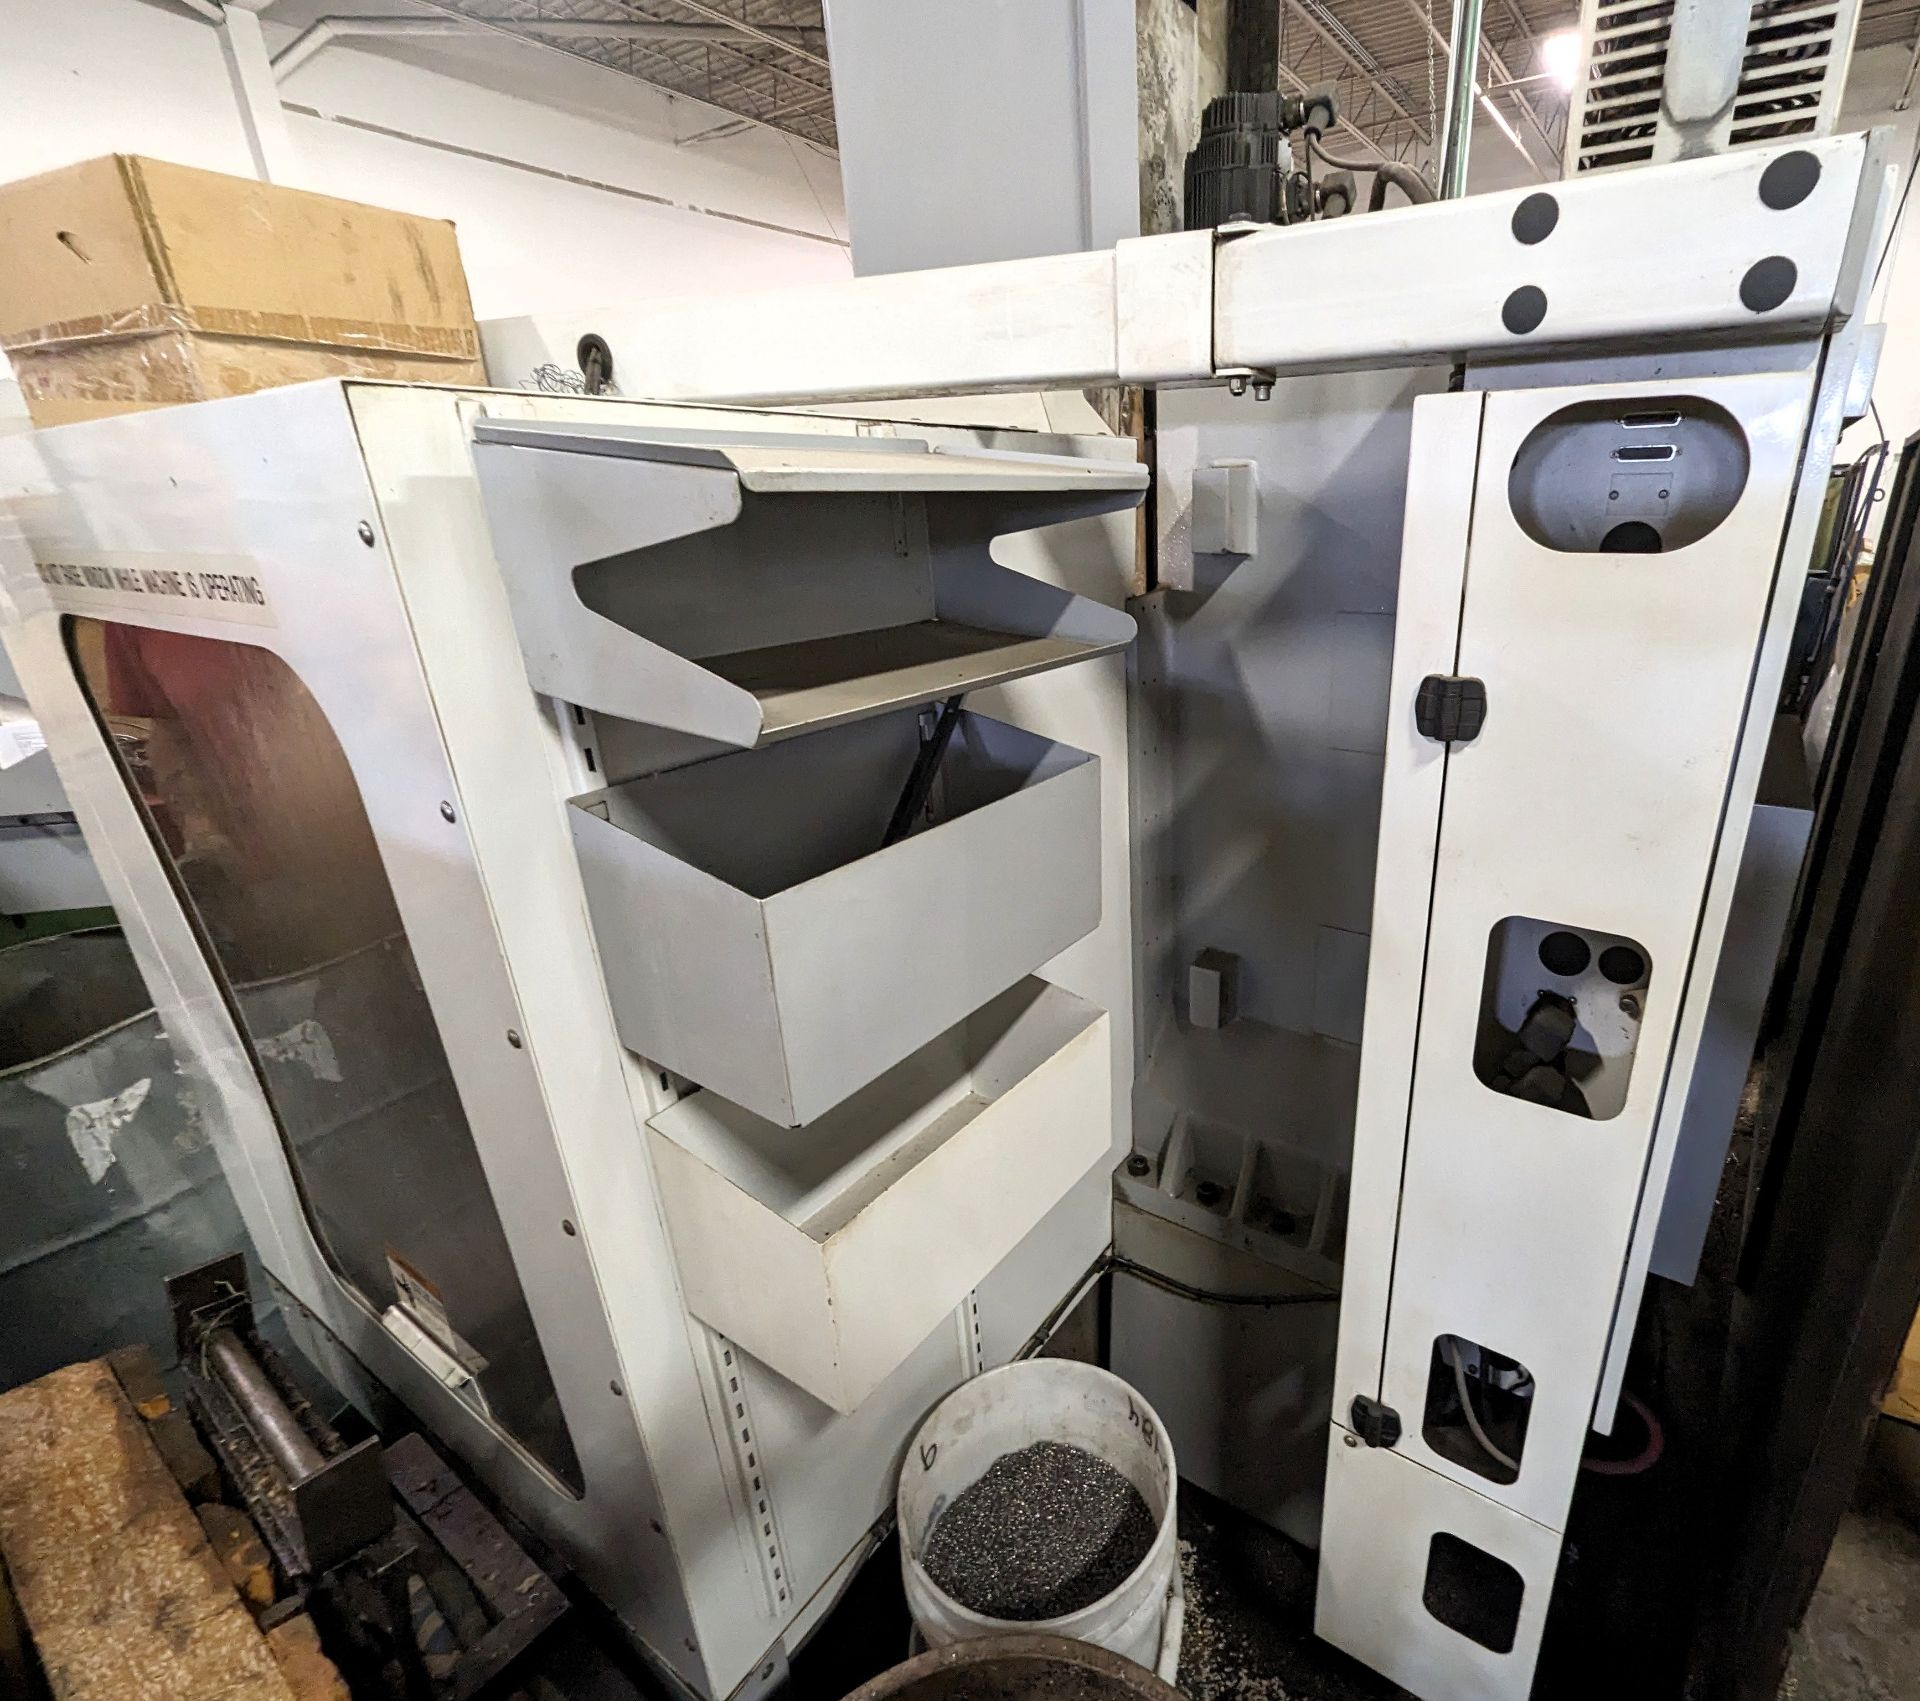 2004 HAAS VF2D CNC VERTICAL MACHINING CENTER, CNC CONTROL, TRAVELS: X-30”, Y-16”, Z-20”, 14” X 36” - Image 12 of 12